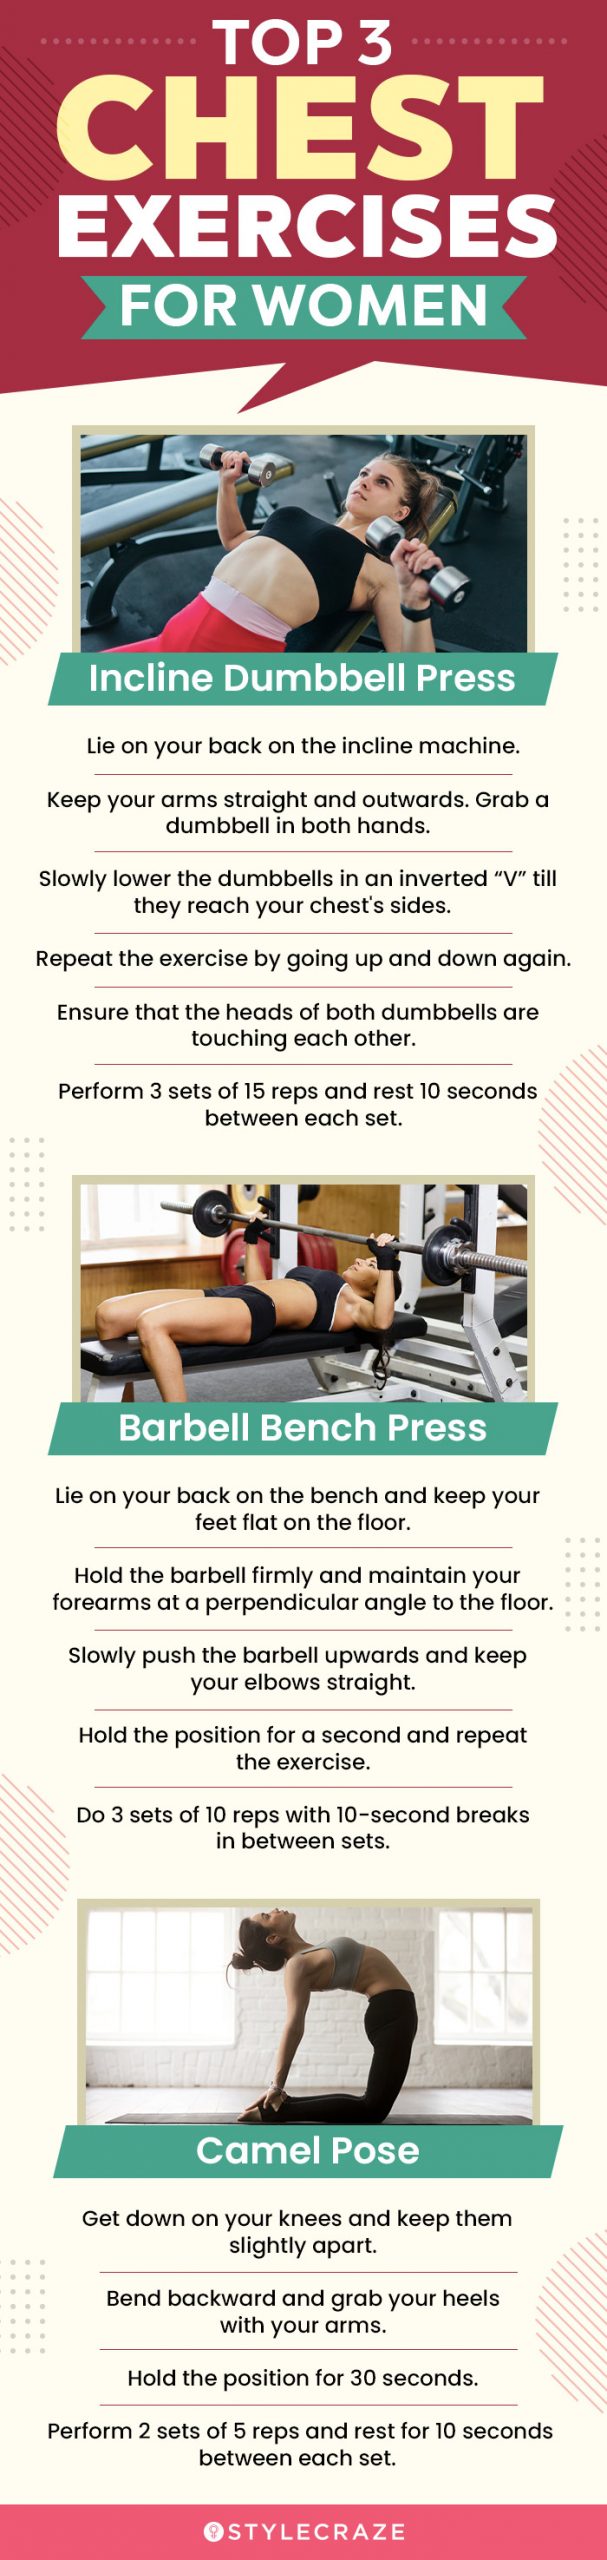 top 3 chest exercises for women (infographic)